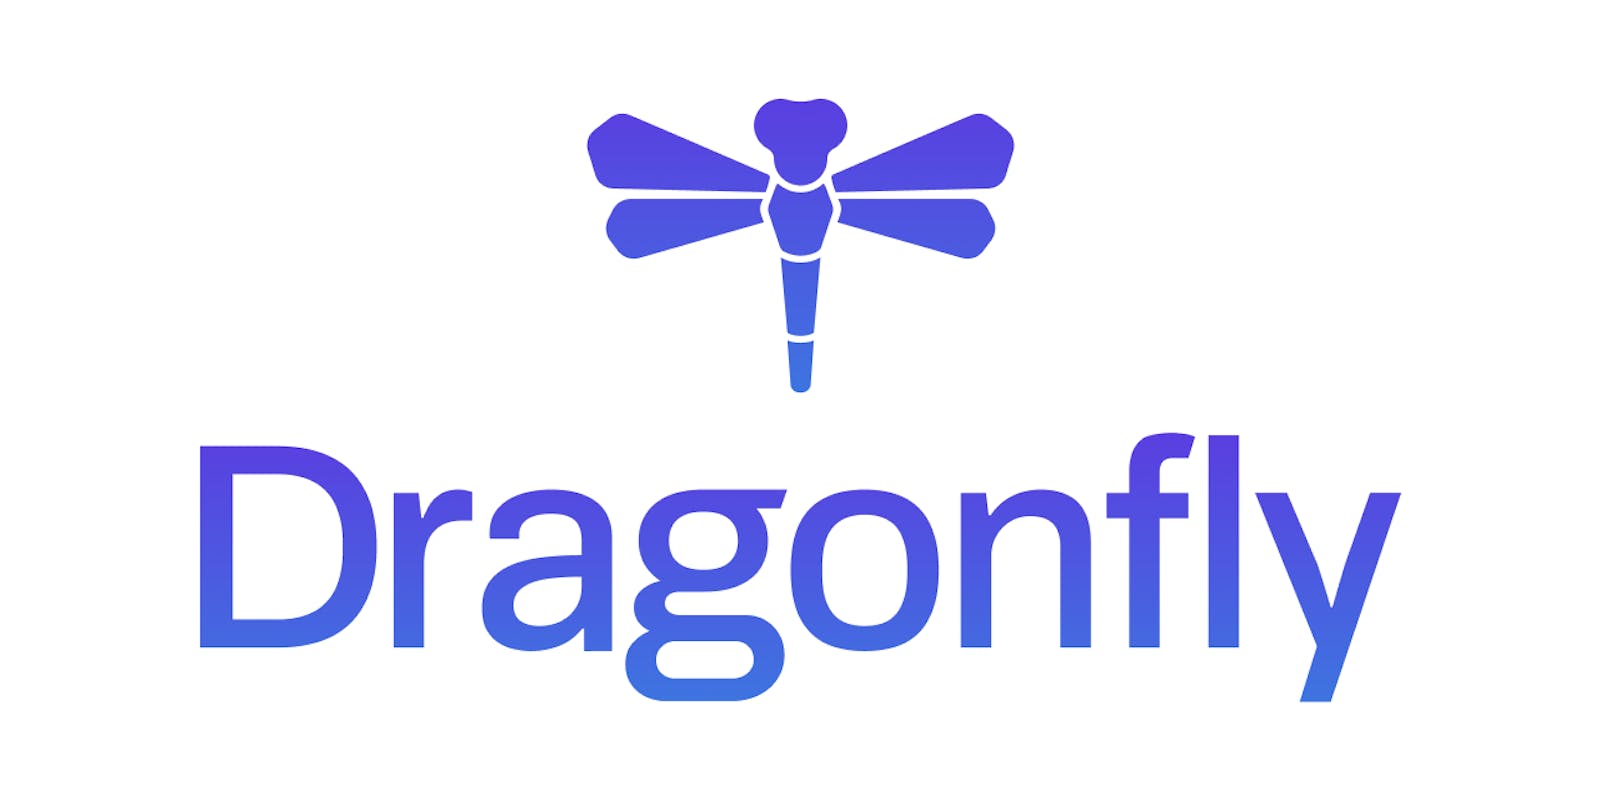 Cover Image for Dragonfly: A Fast and Efficient In-Memory Data Store